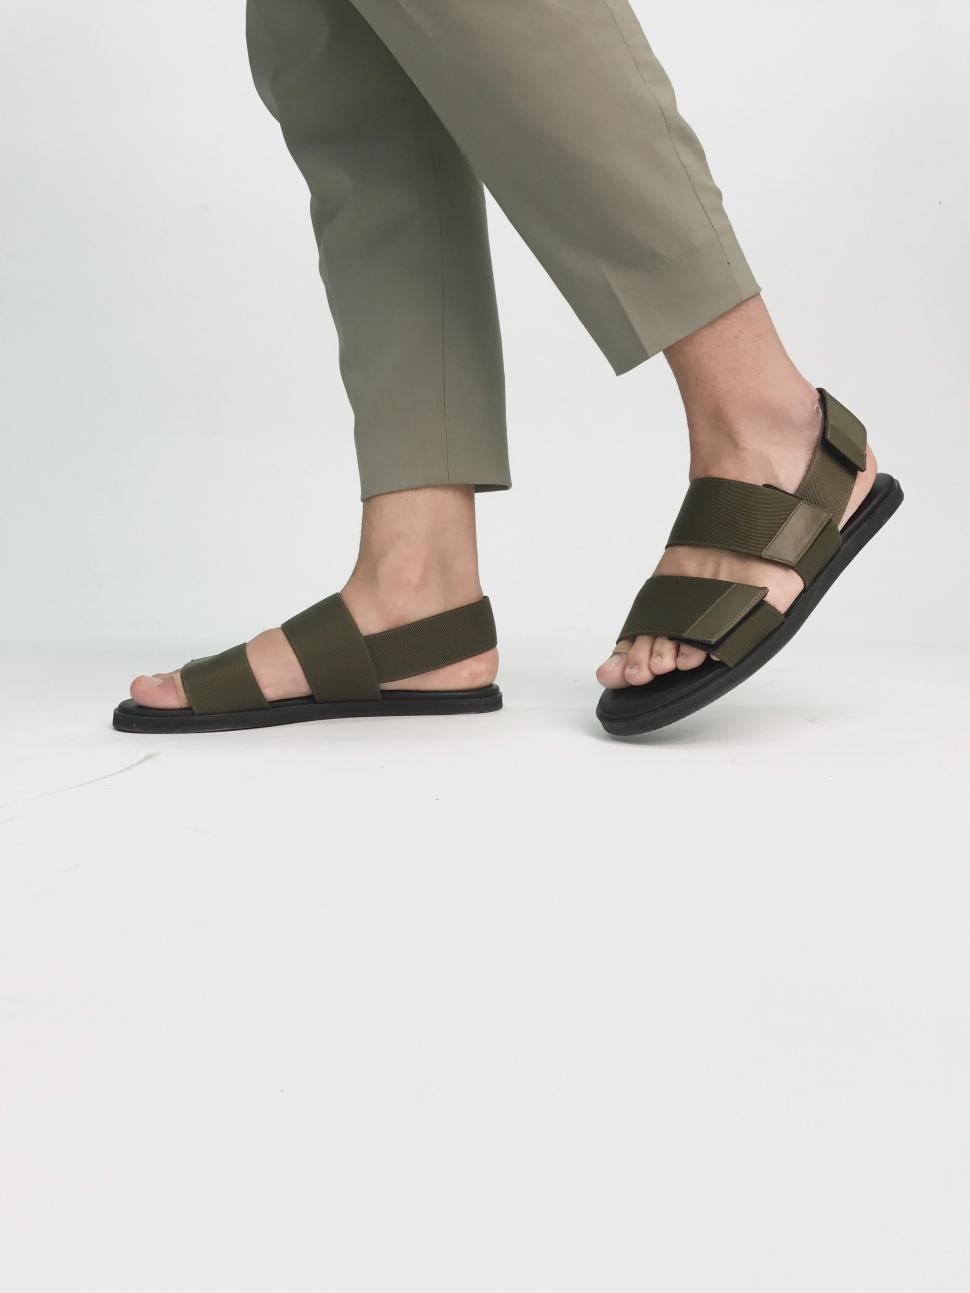 Free Image of Person Wearing Sandals Standing on White Surface 